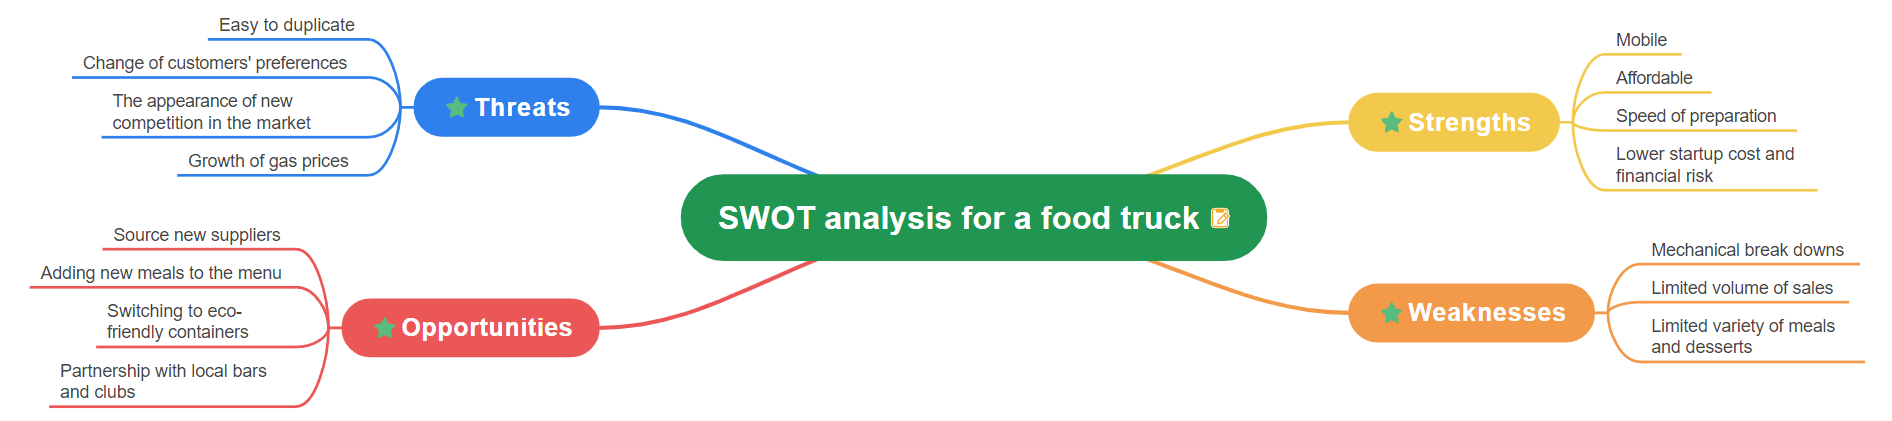 SWOT Analysis for a food truck